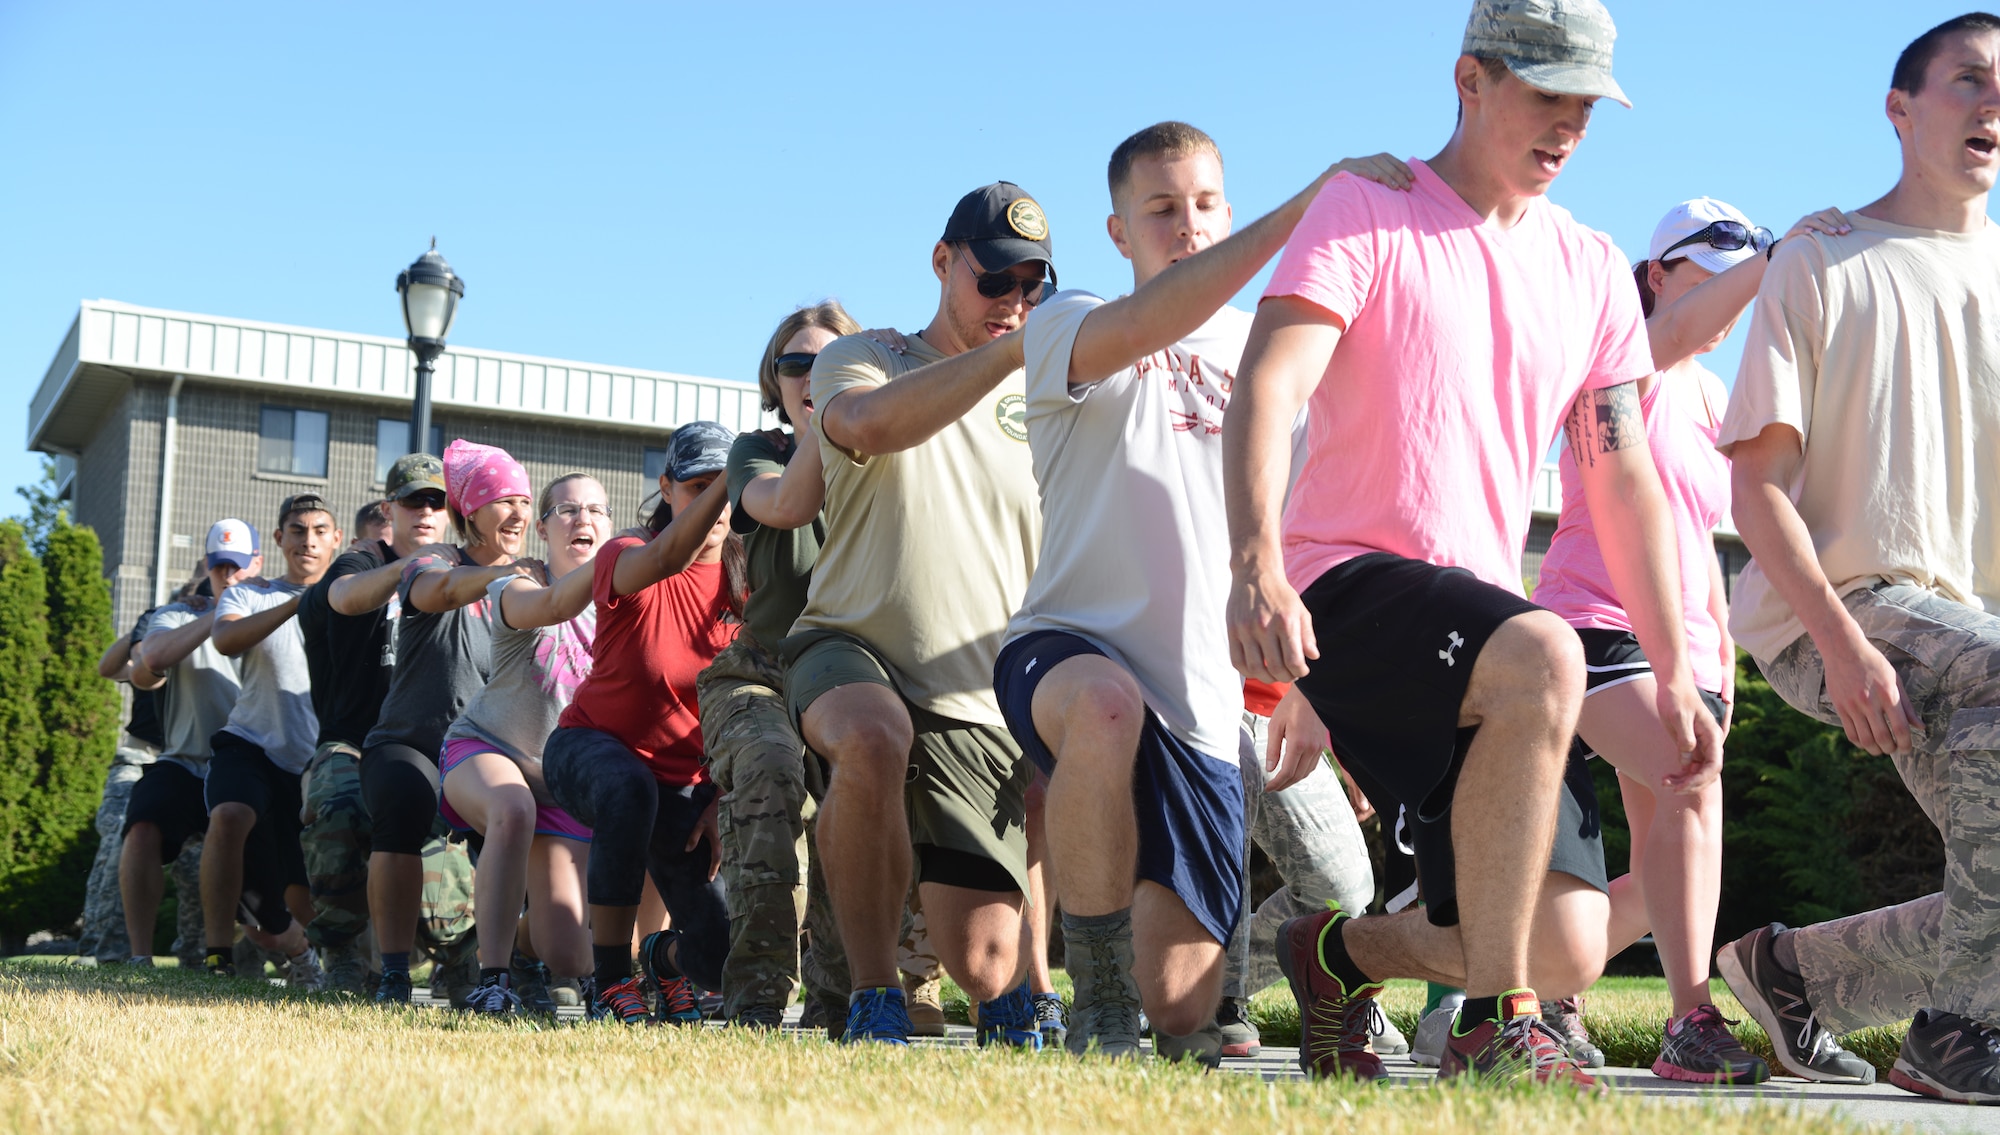 Members perform team lunges as part of the GORUCK Light Challenge July 12, 2014, at Mountain Home Air Force Base, Idaho. The new Air Force pilot program aims to get Airmen, dependents and Department of Defense employees involved in activities challenging them as a team and also encouraging a healthy, resilient lifestyle. (U.S. Air Force photo/Senior Airman Benjamin Sutton)